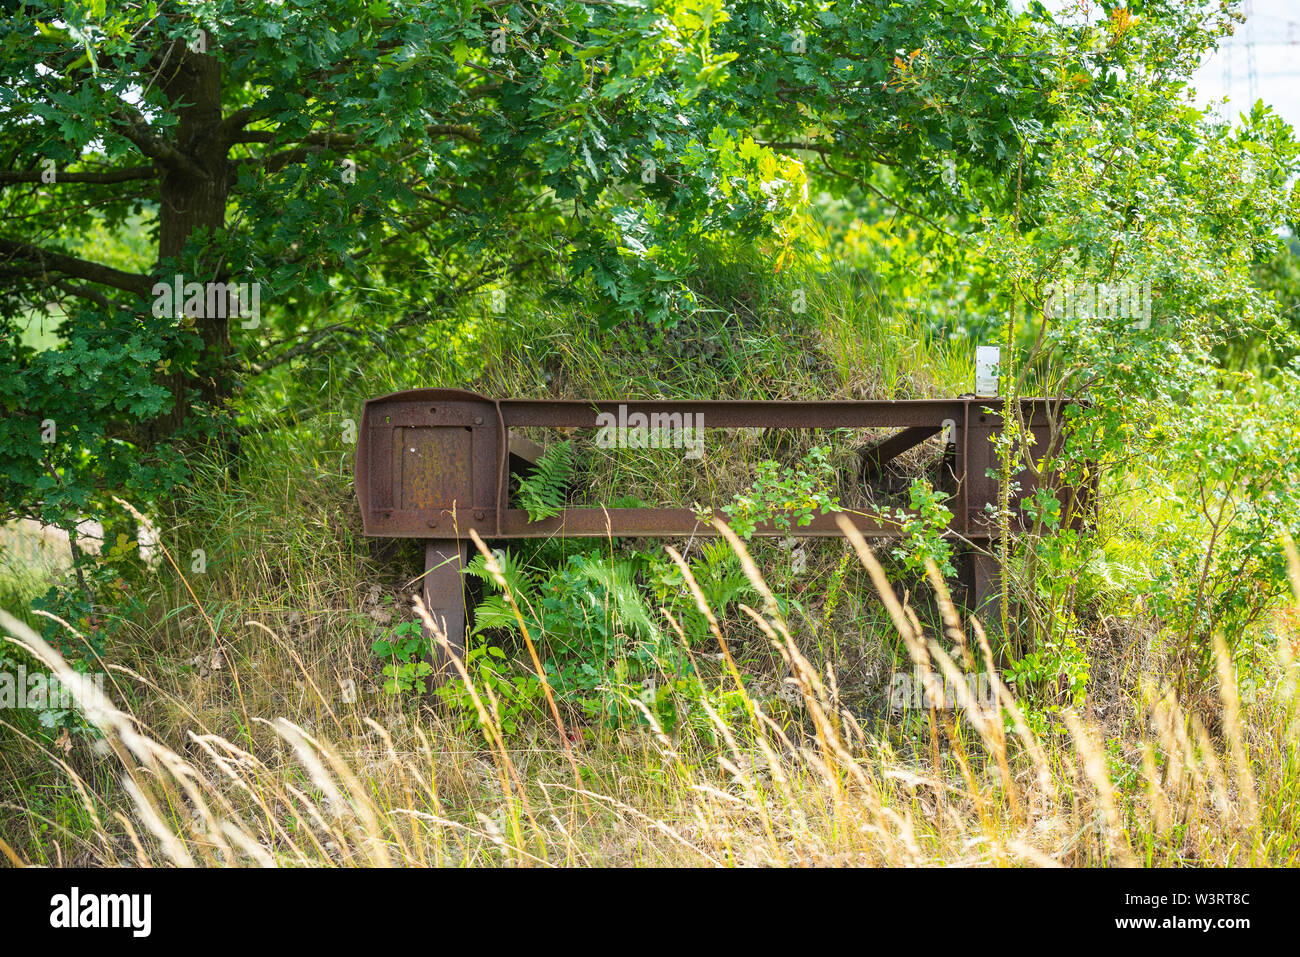 An old forgotten train carriage on a disused railway Stock Photo